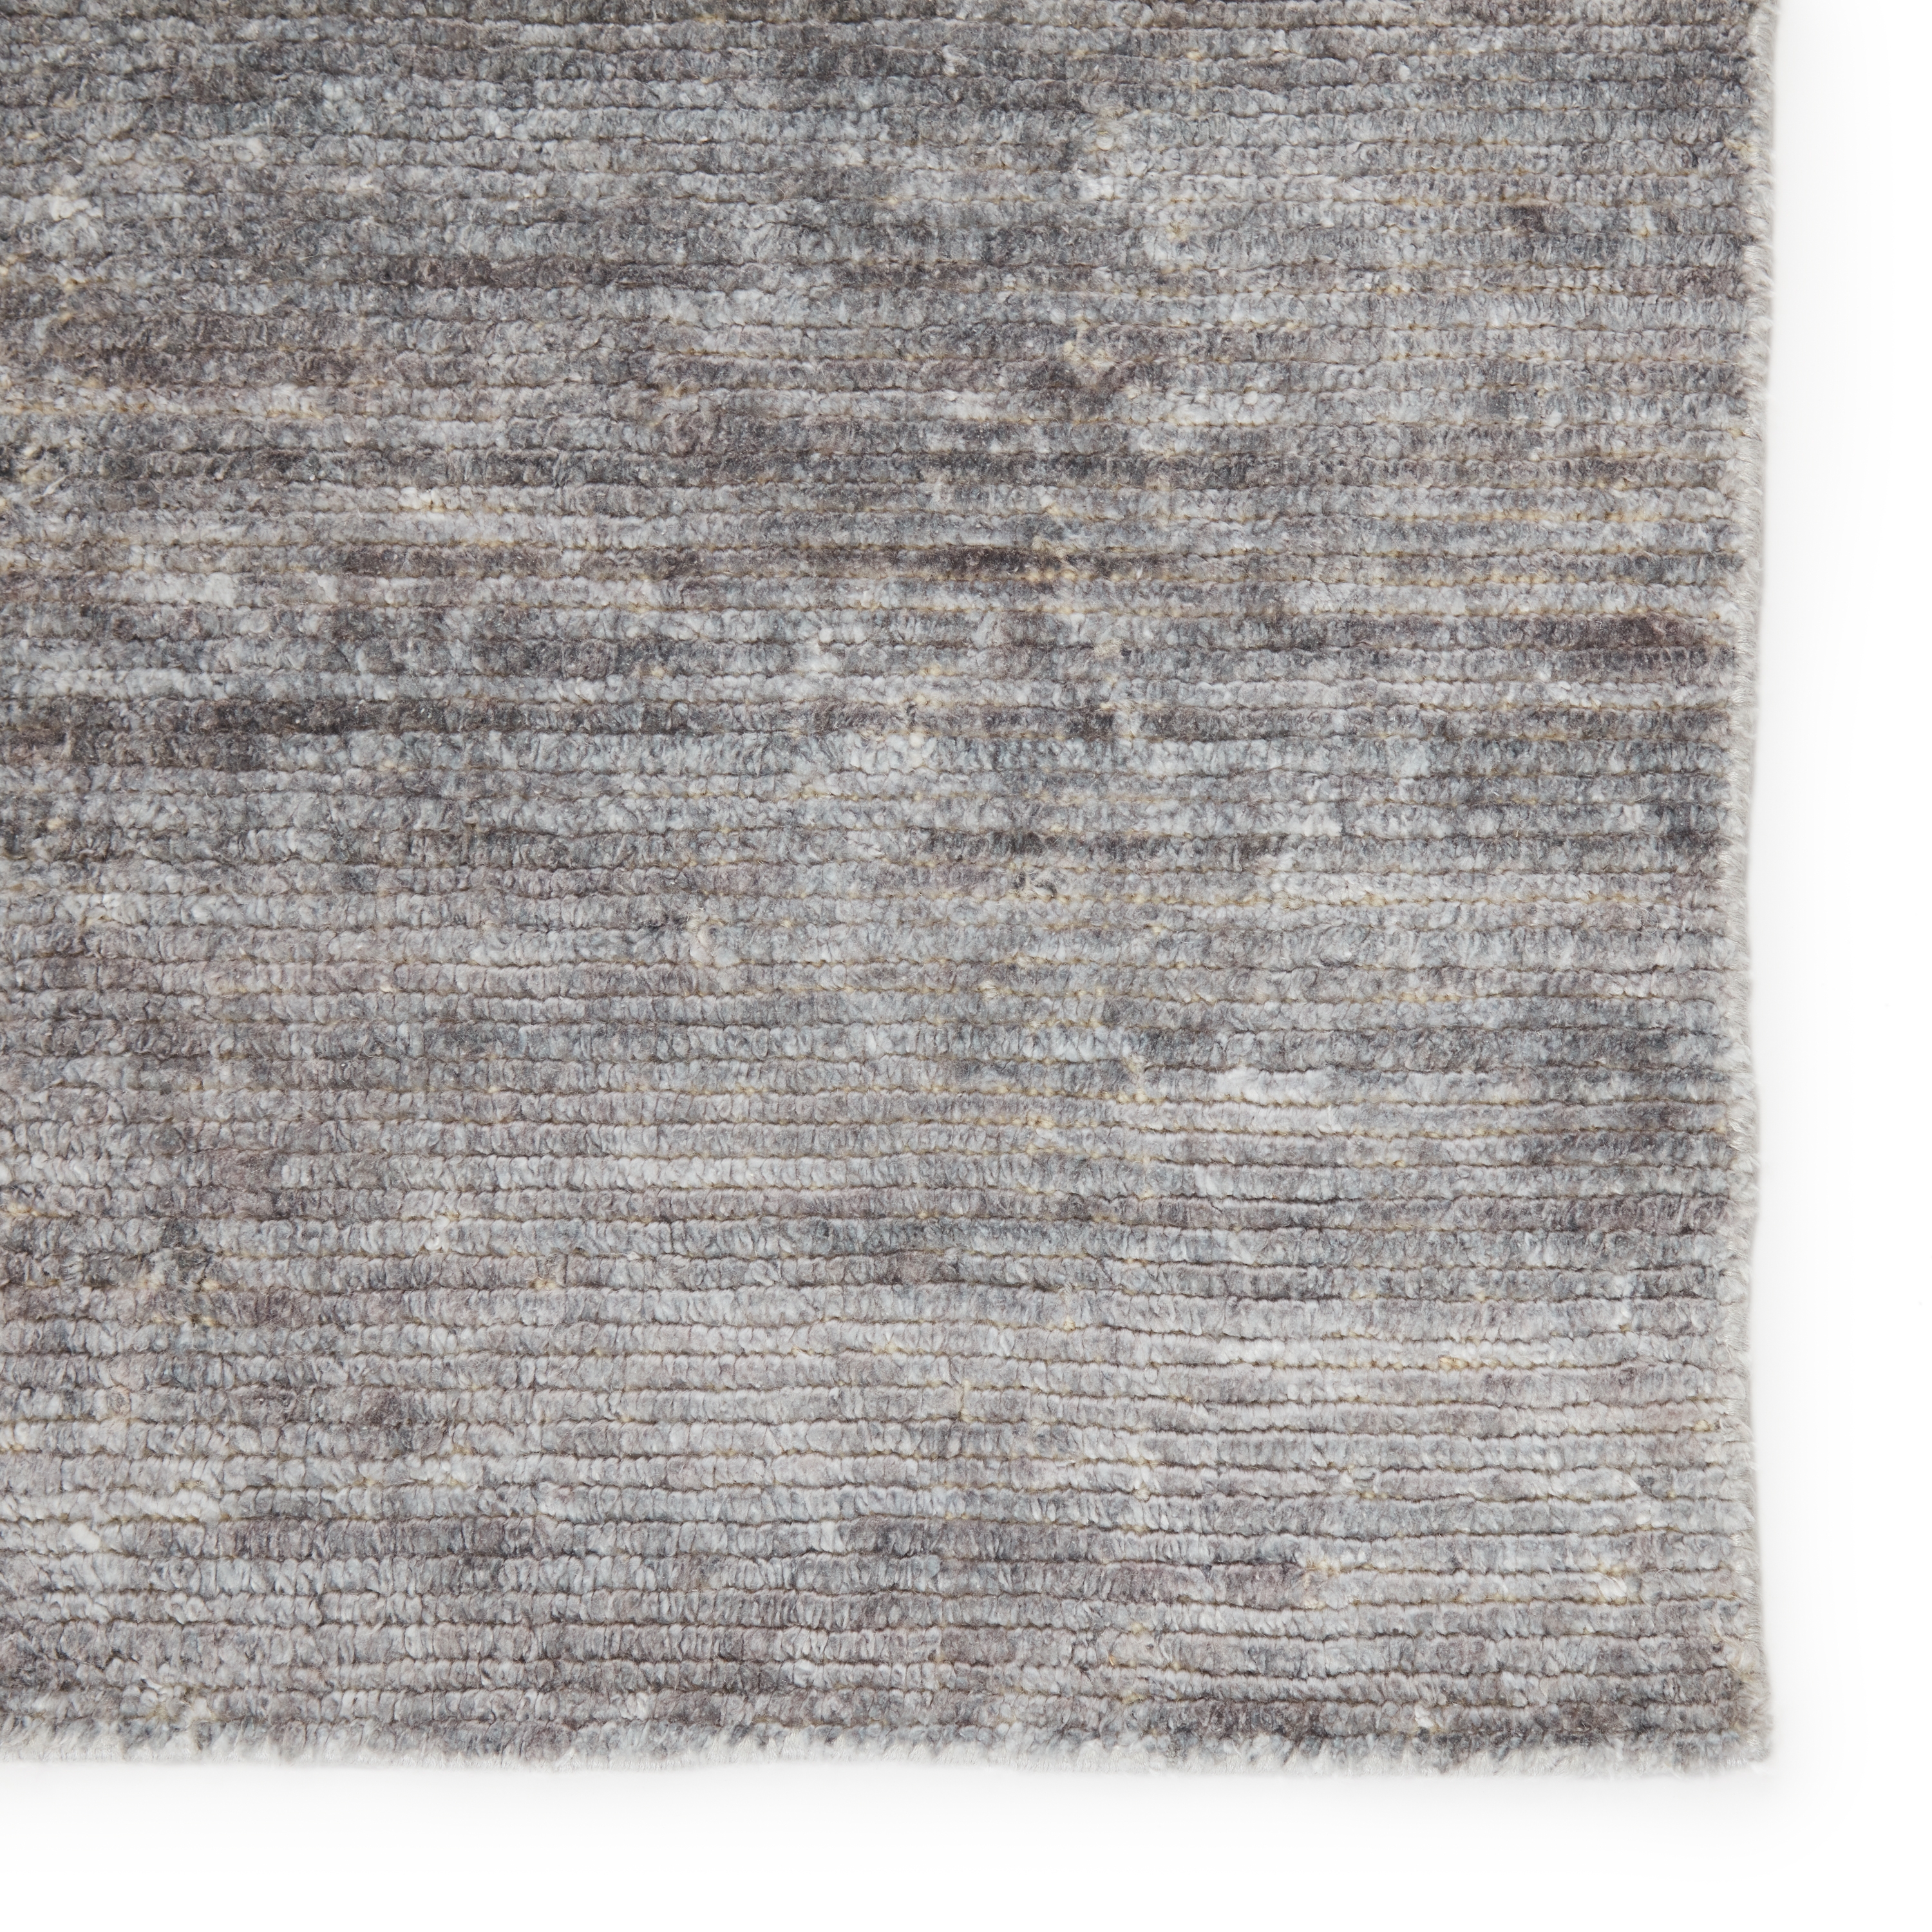 Ardis Handmade Solid Silver/ White Area Rug (9'X12') - Image 3